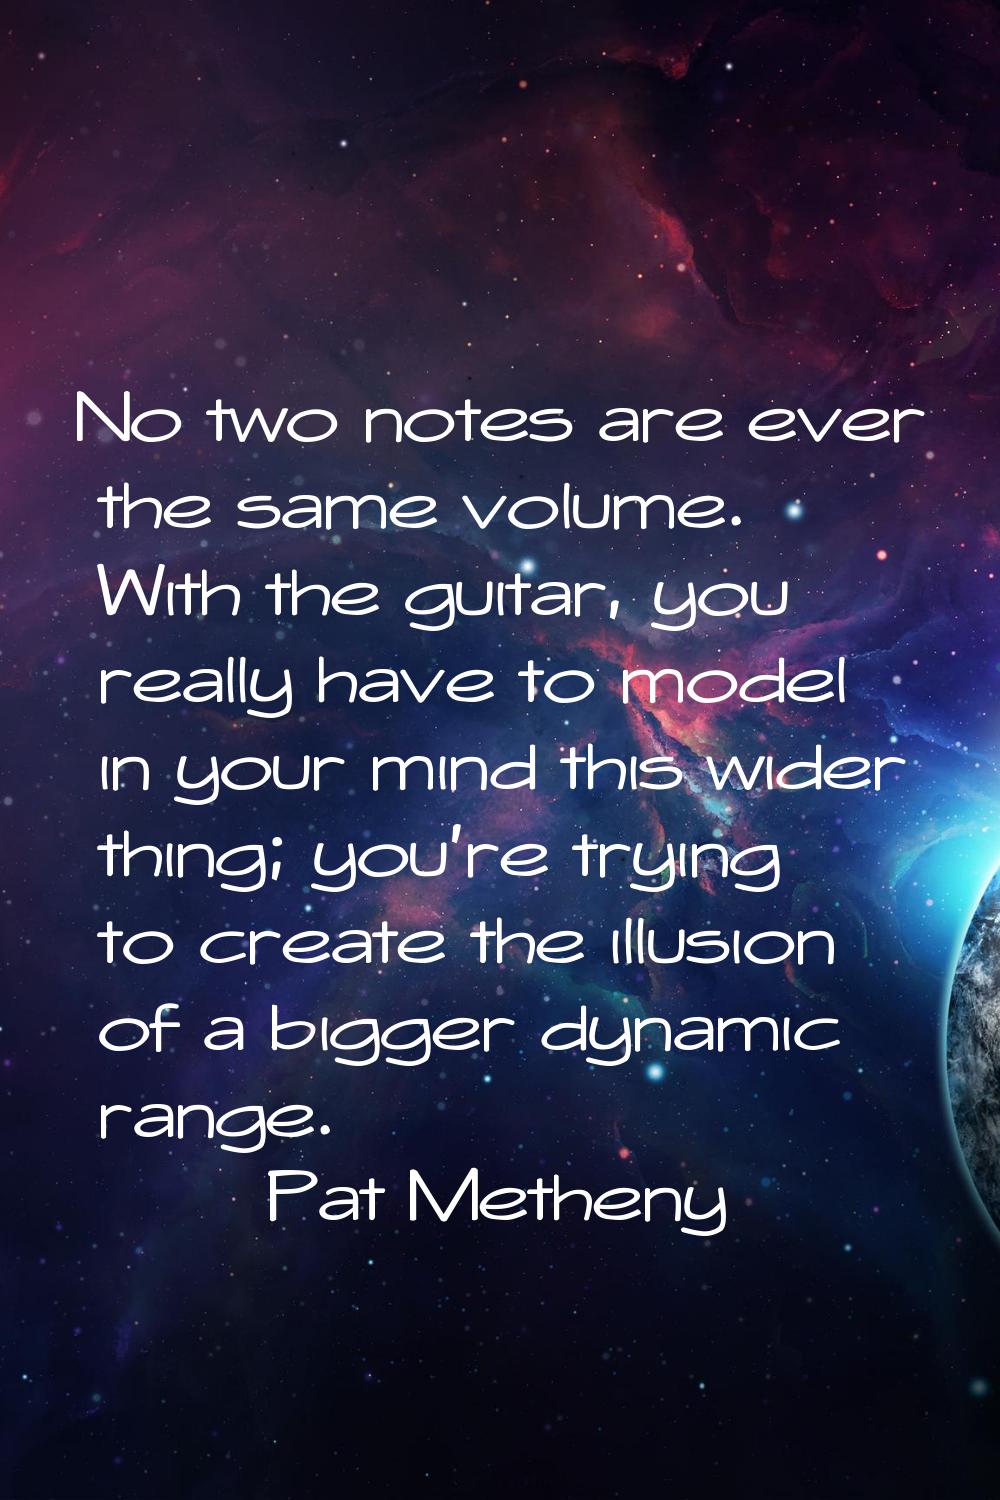 No two notes are ever the same volume. With the guitar, you really have to model in your mind this 